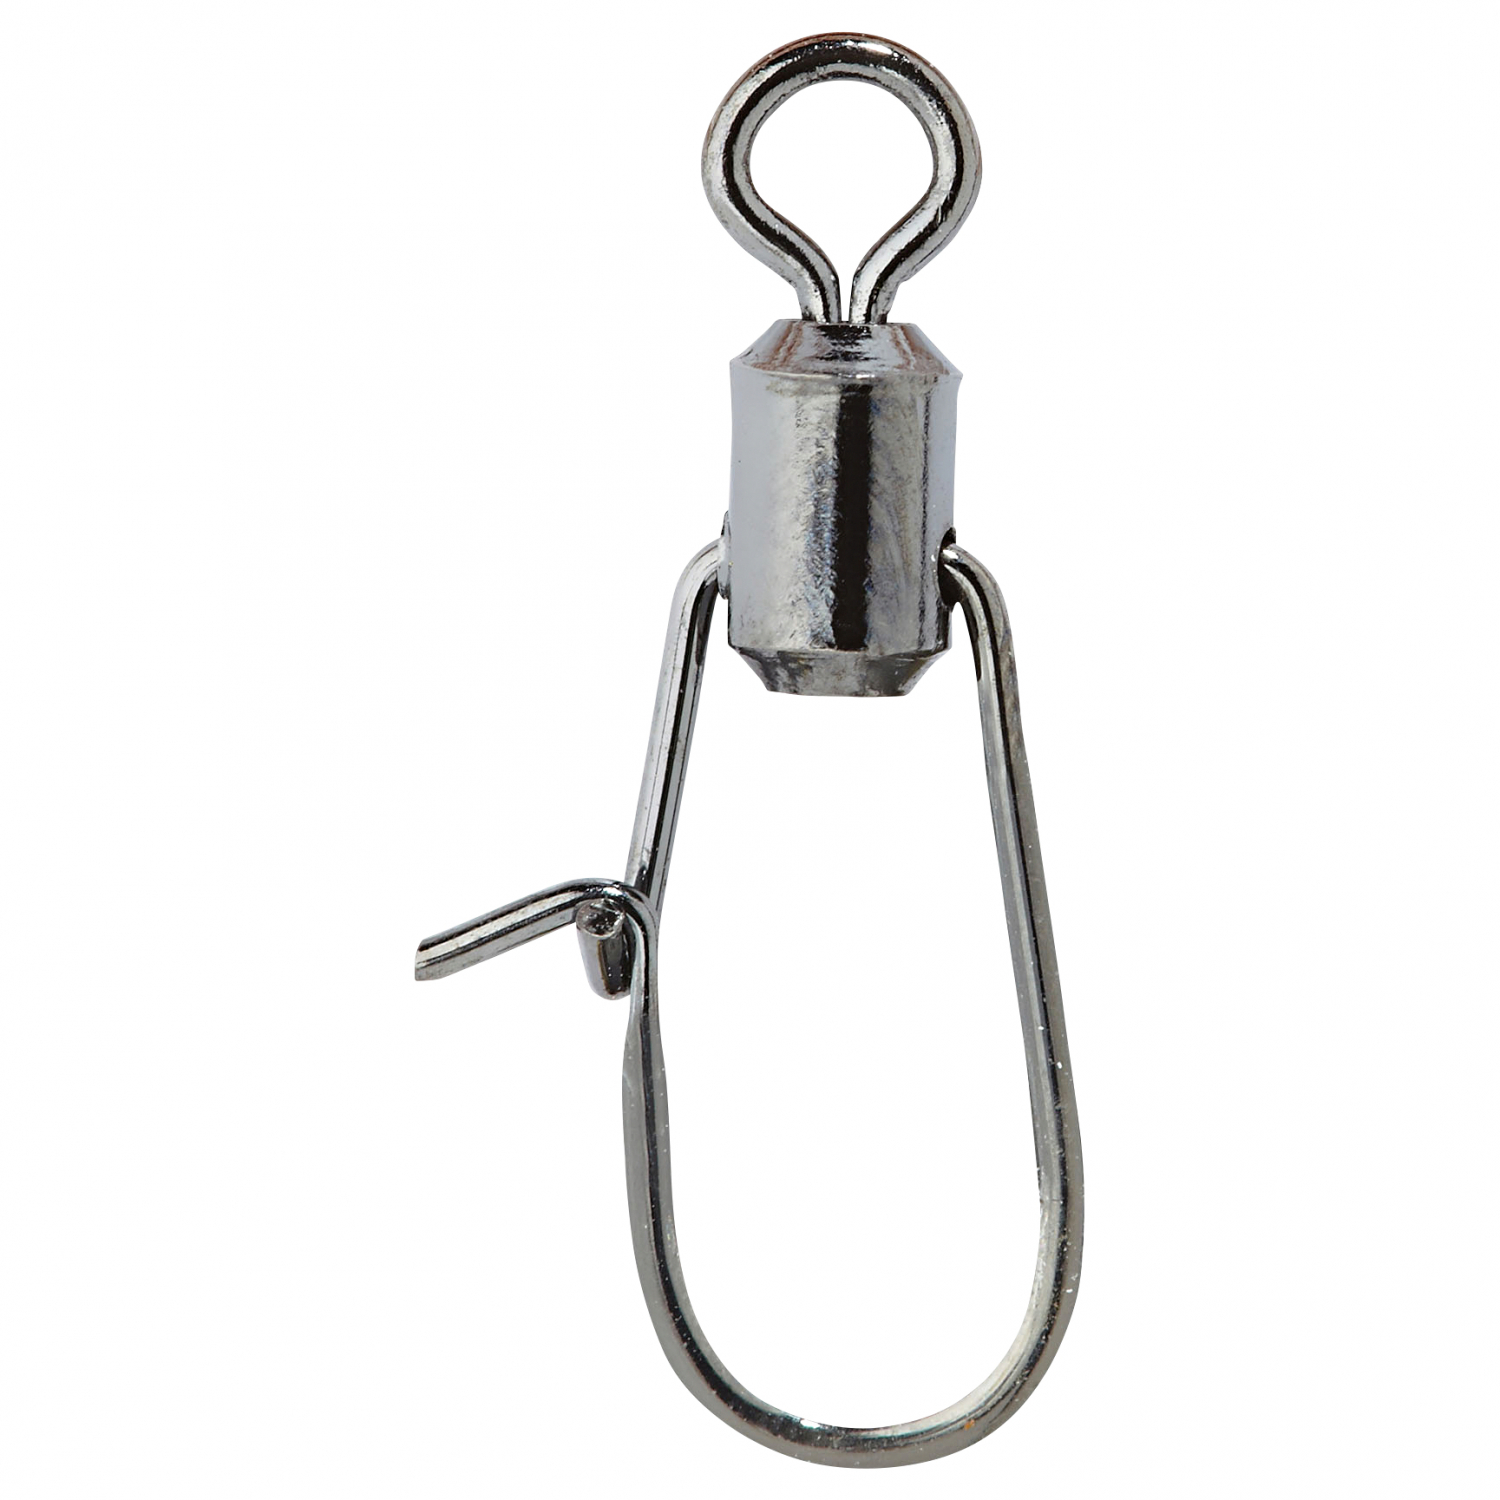 Owner Mini Hanger with Swivel at low prices